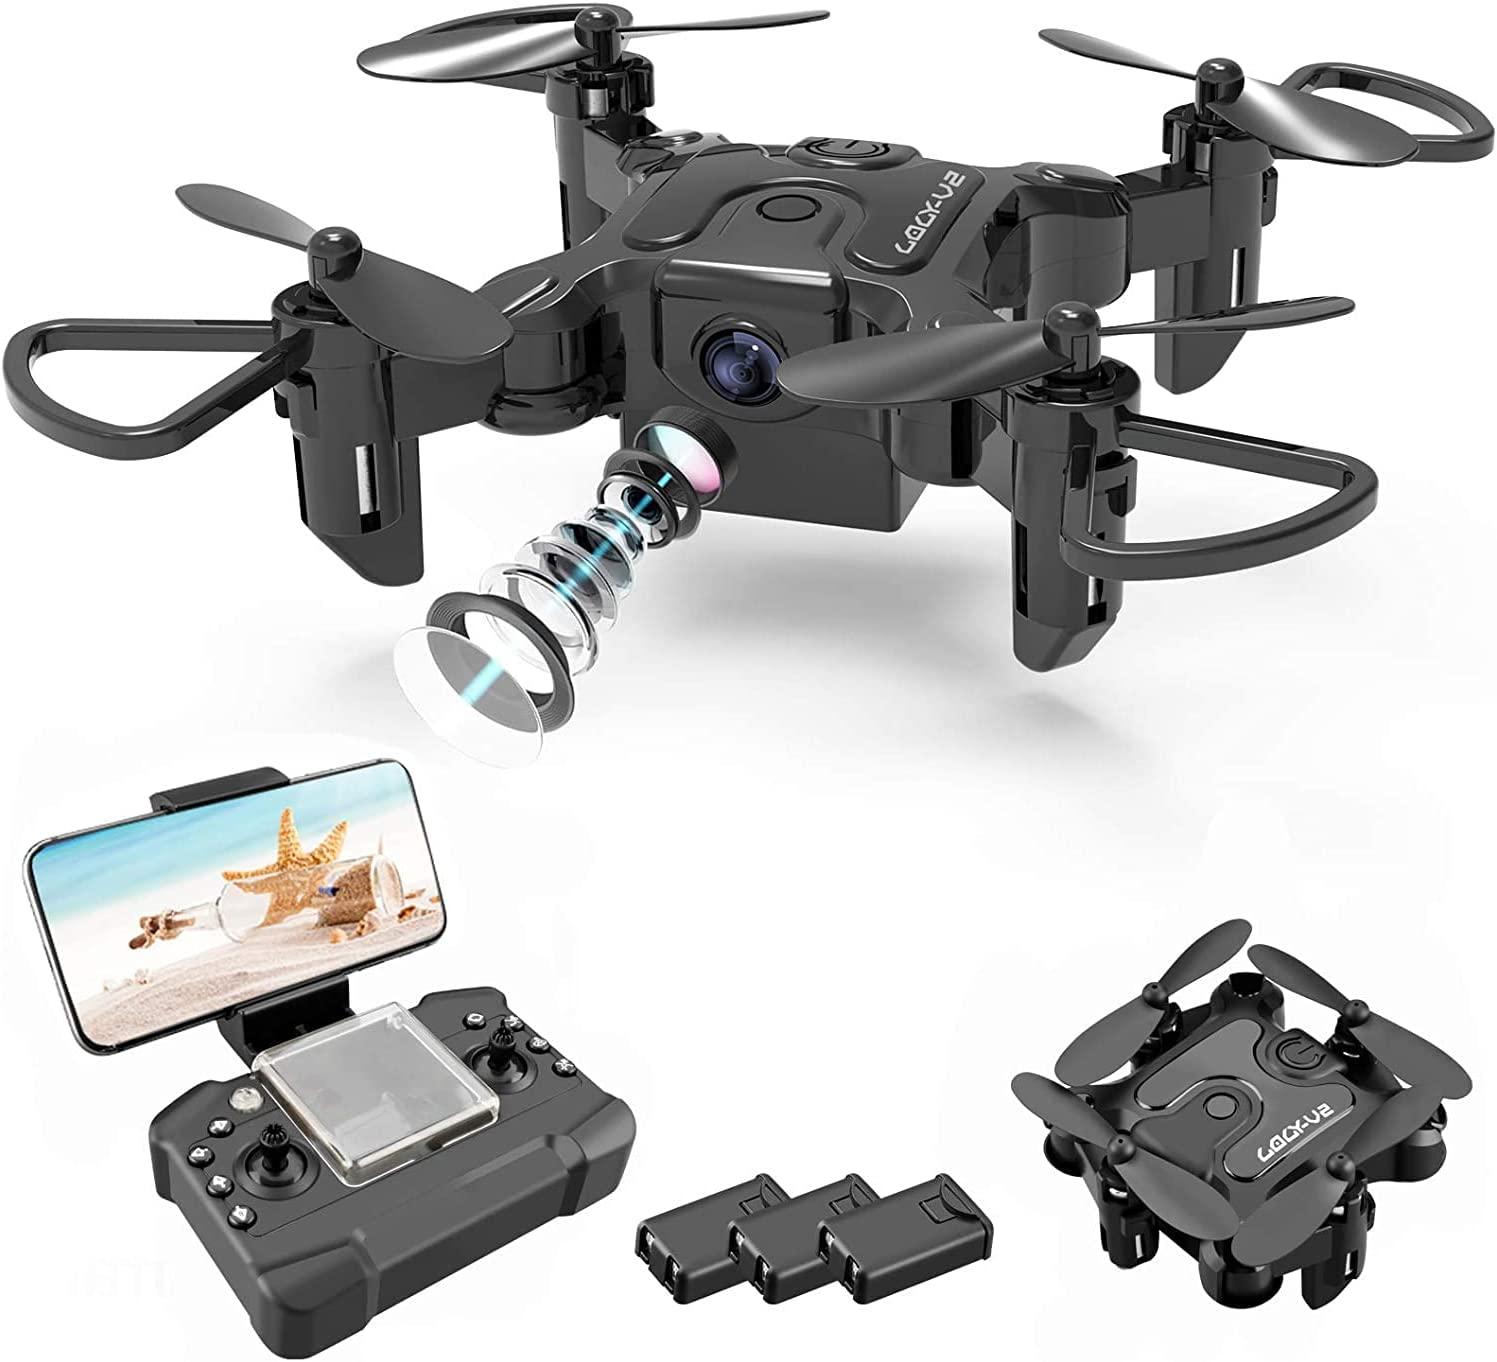 Foldable RC Drone Helicopter WiFi FPV Altitude Hold Headless Mode  Quadcopter Toy